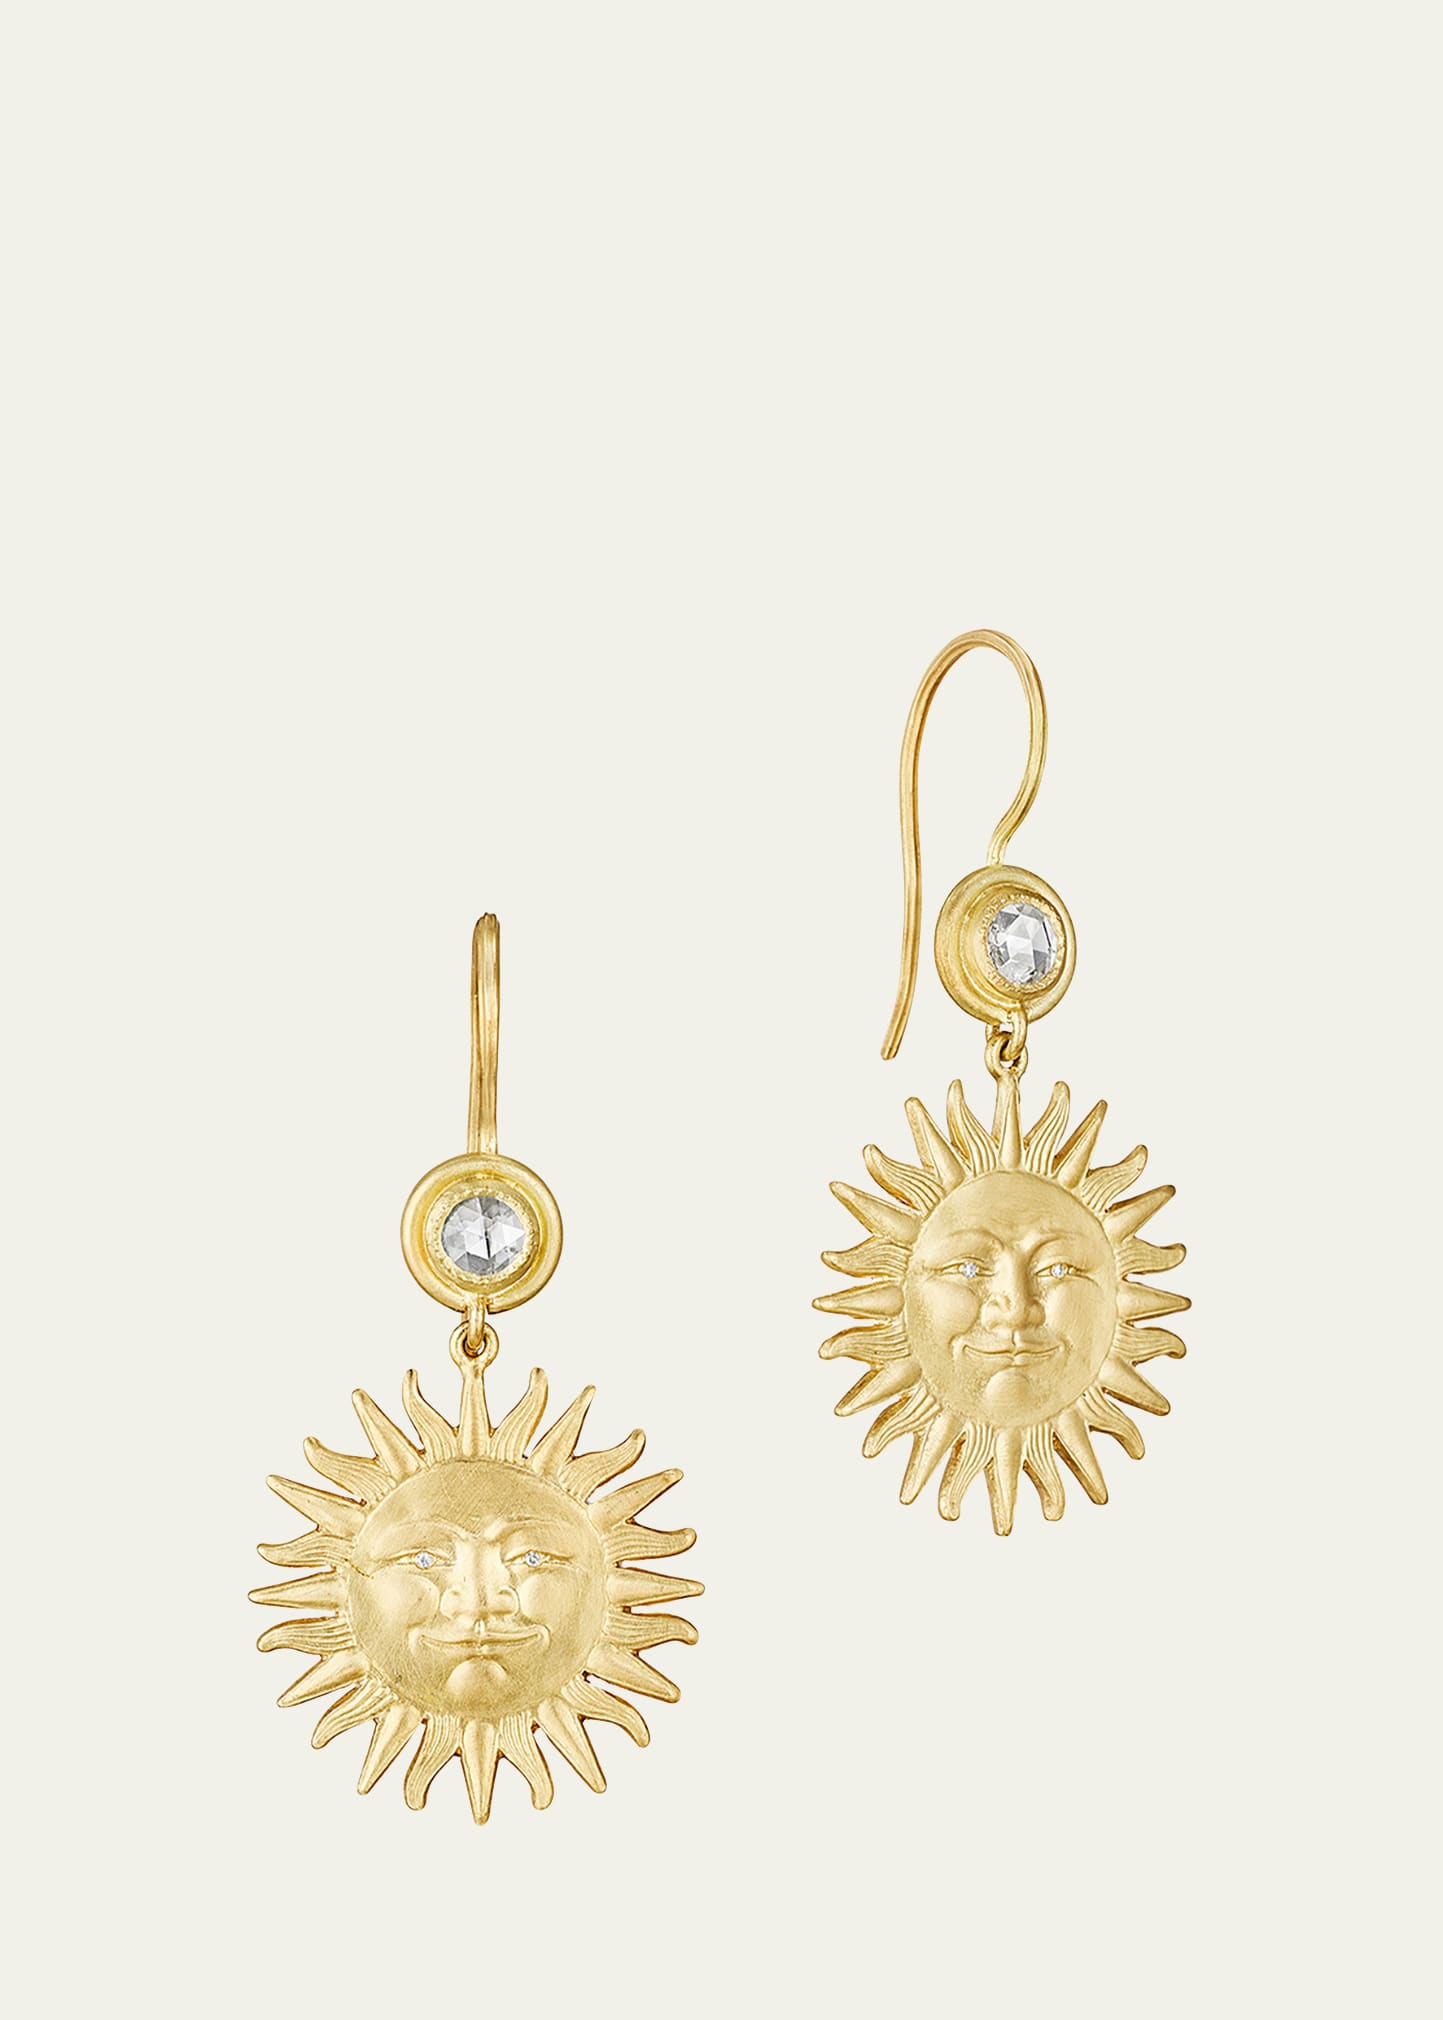 Anthony Lent Sunface Earrings In 18k Gold With Diamonds In Yg